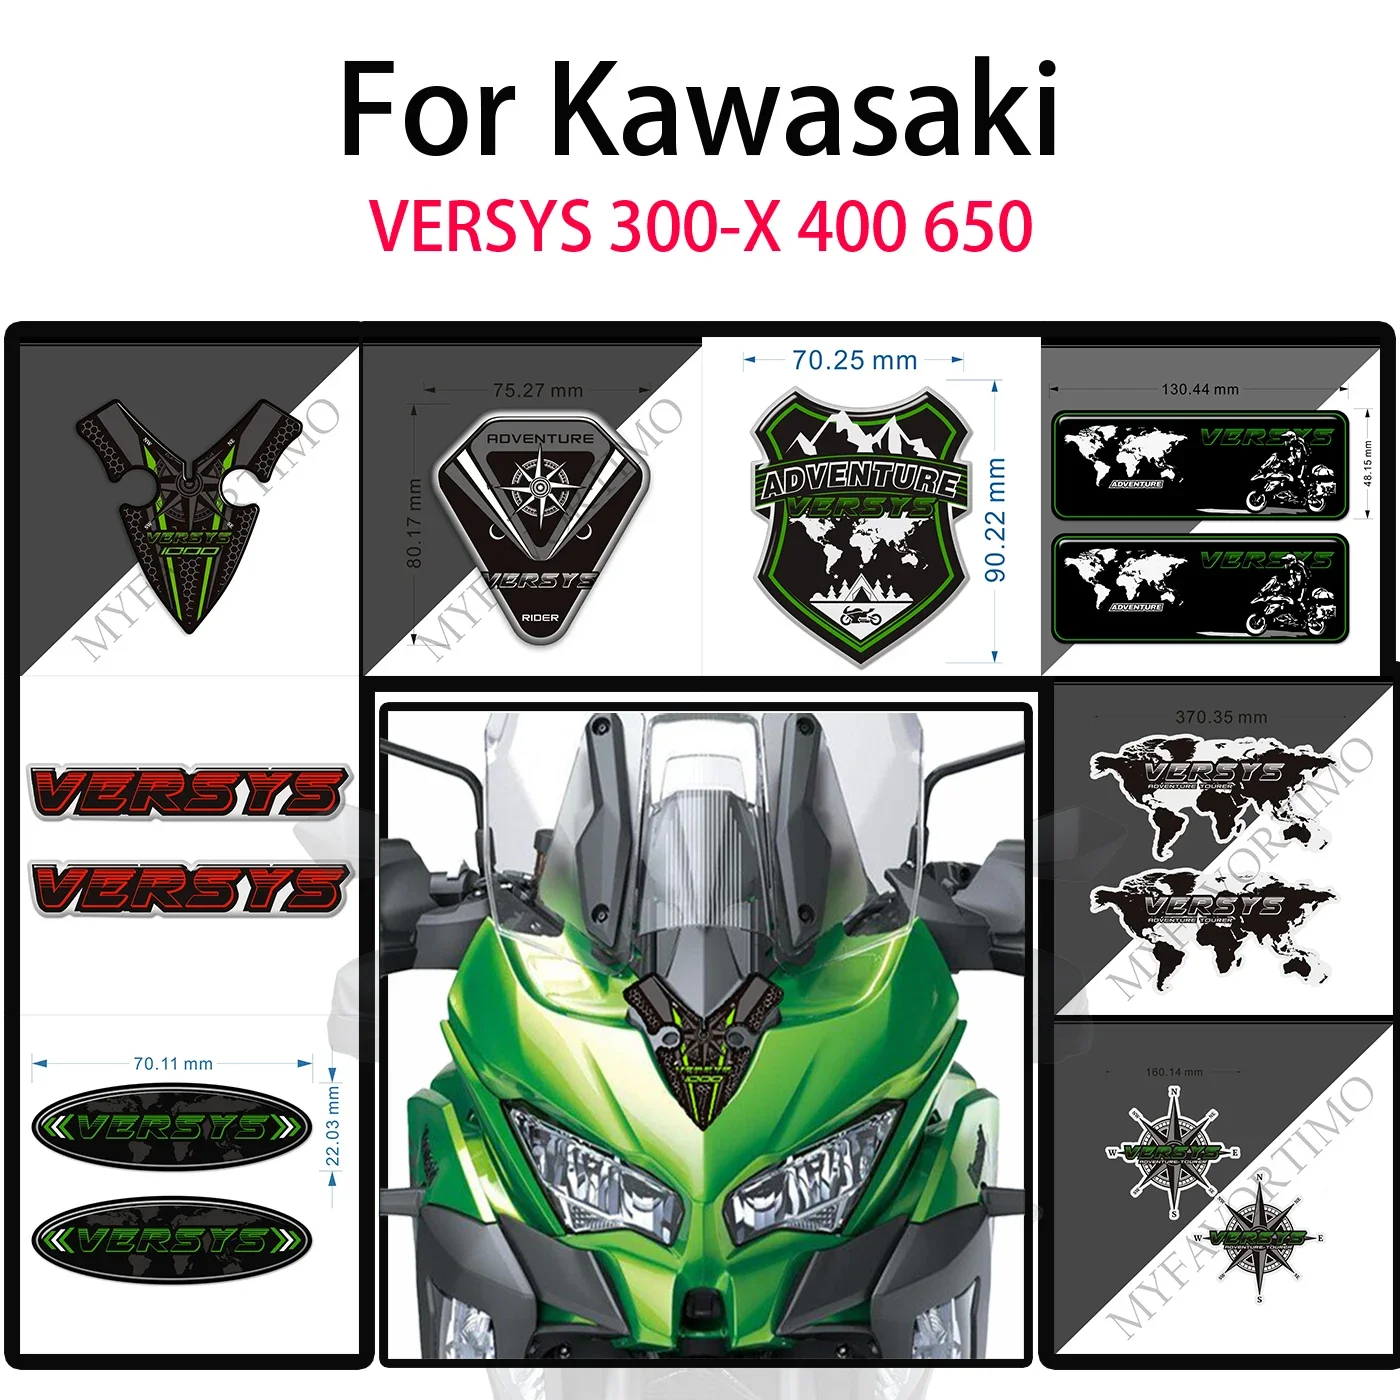 Motorcycle Stickers For Kawasaki VERSYS 300-X 400 650 1000 VERSYS-X 250 Trunk Luggage Cases Tank Pad Gas Fuel Oil Kit Knee